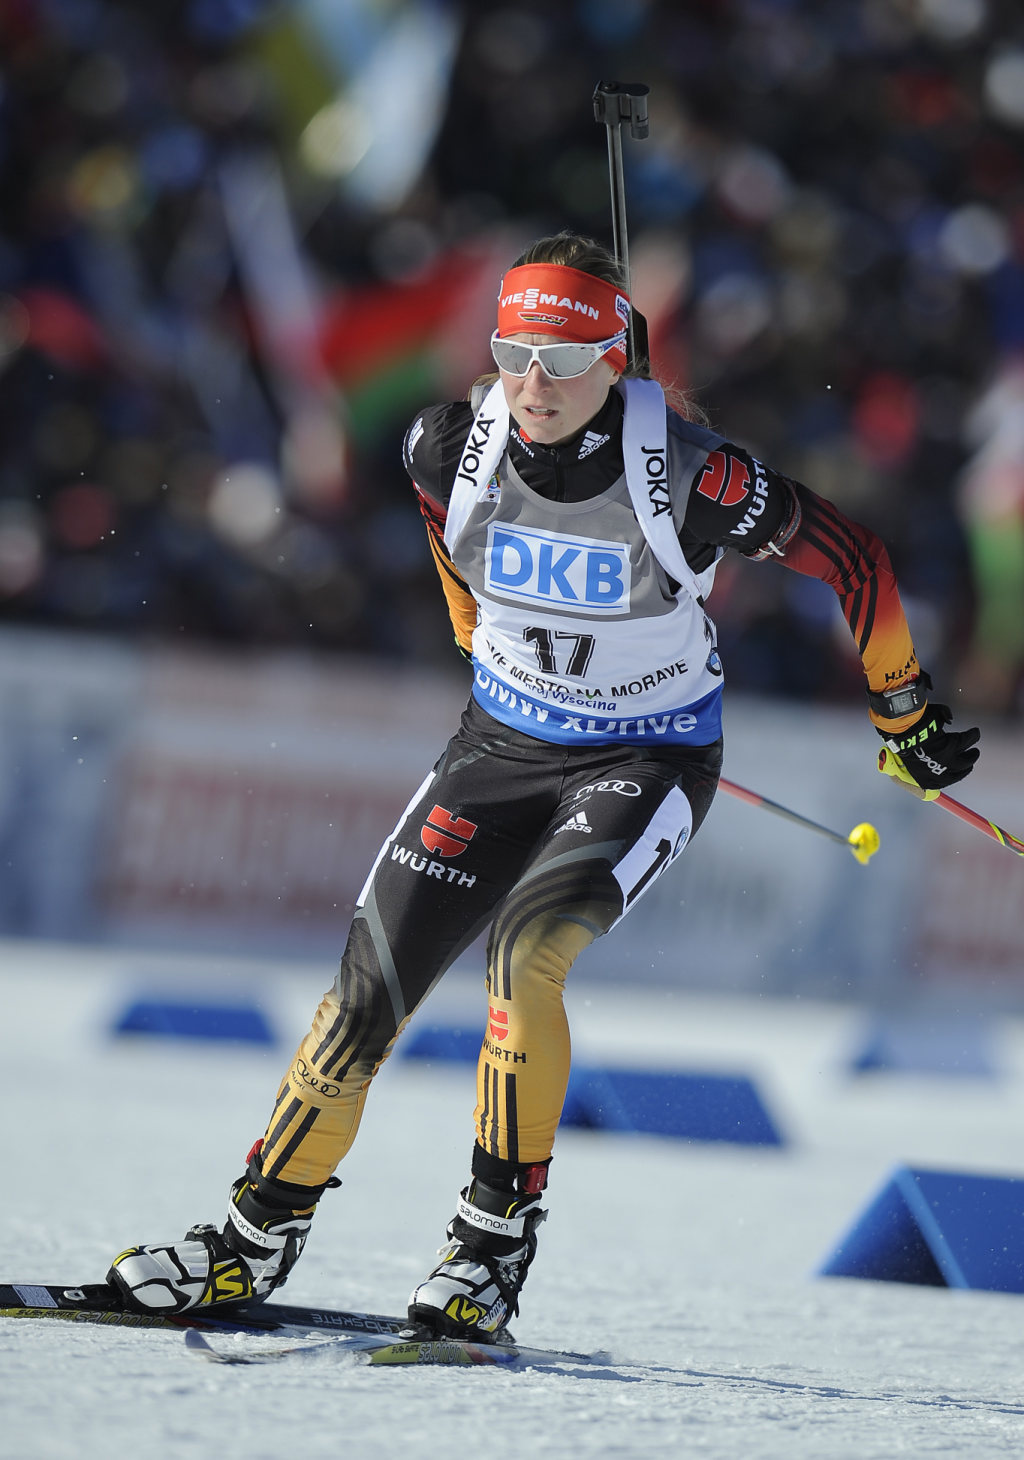 Franziska Hildebrand from Germany skis to finish second in the фото (photo)